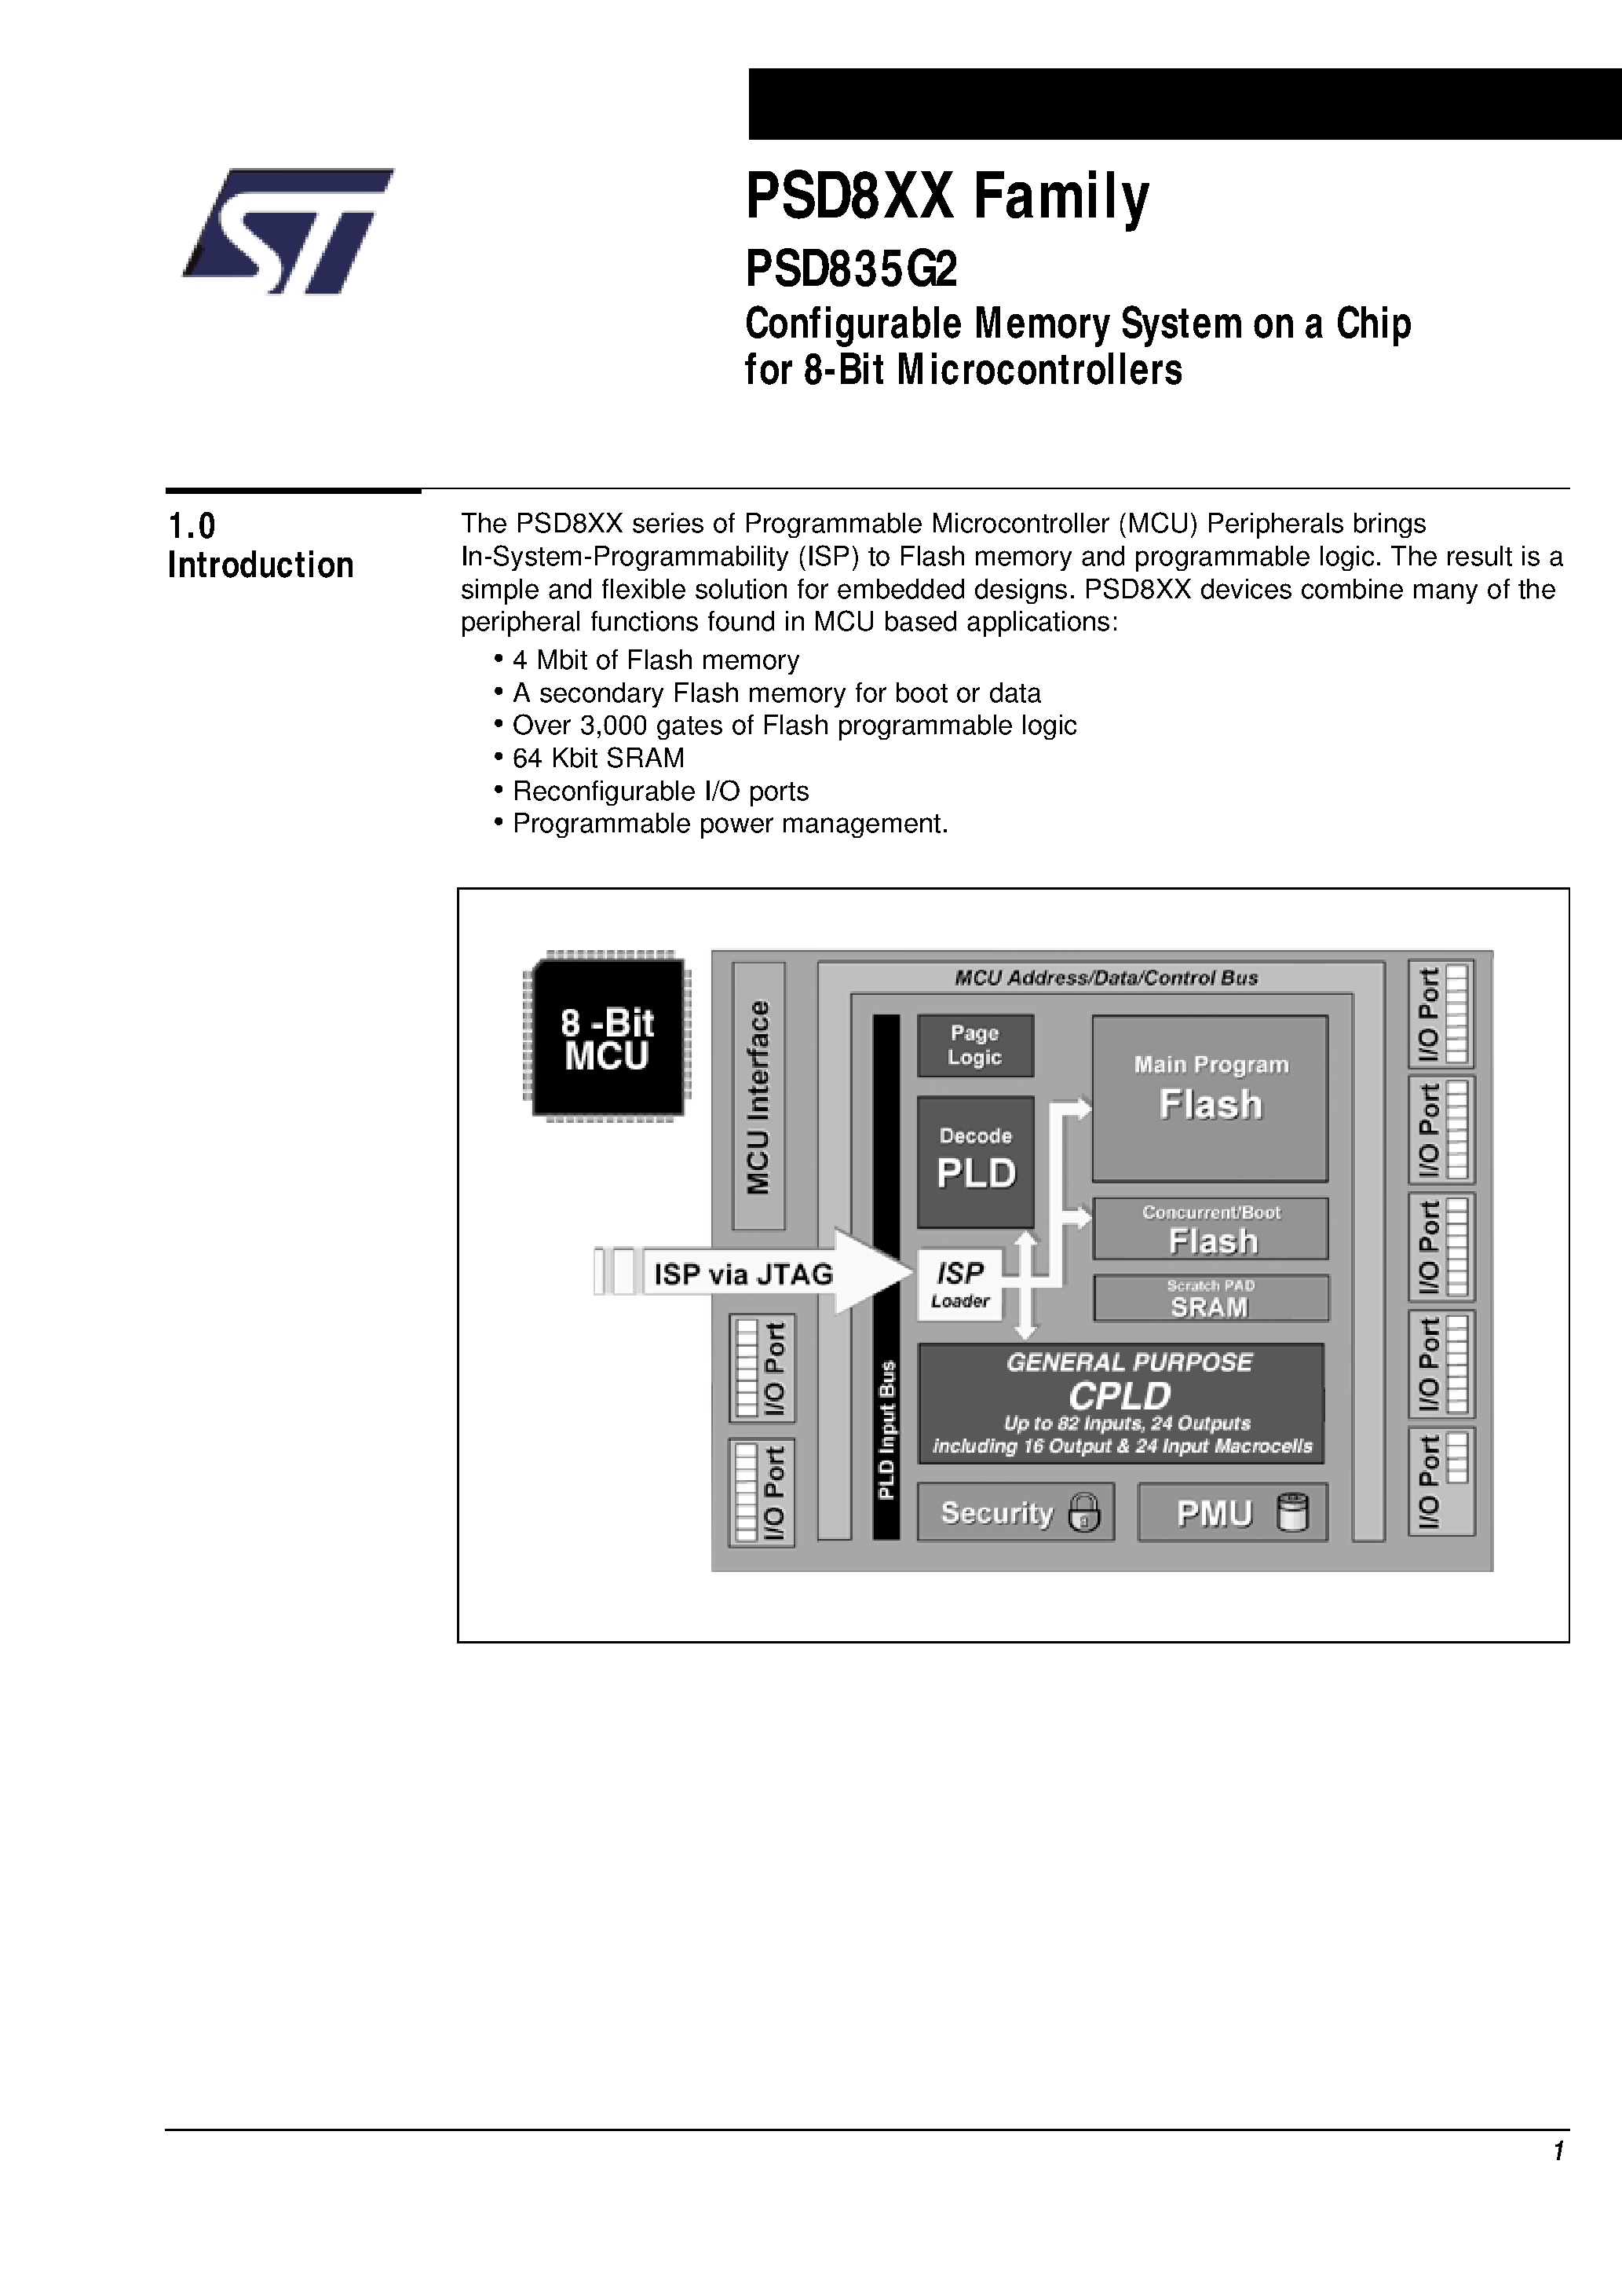 Datasheet PSD835F1-A-12MI - Configurable Memory System on a Chip for 8-Bit Microcontrollers page 2